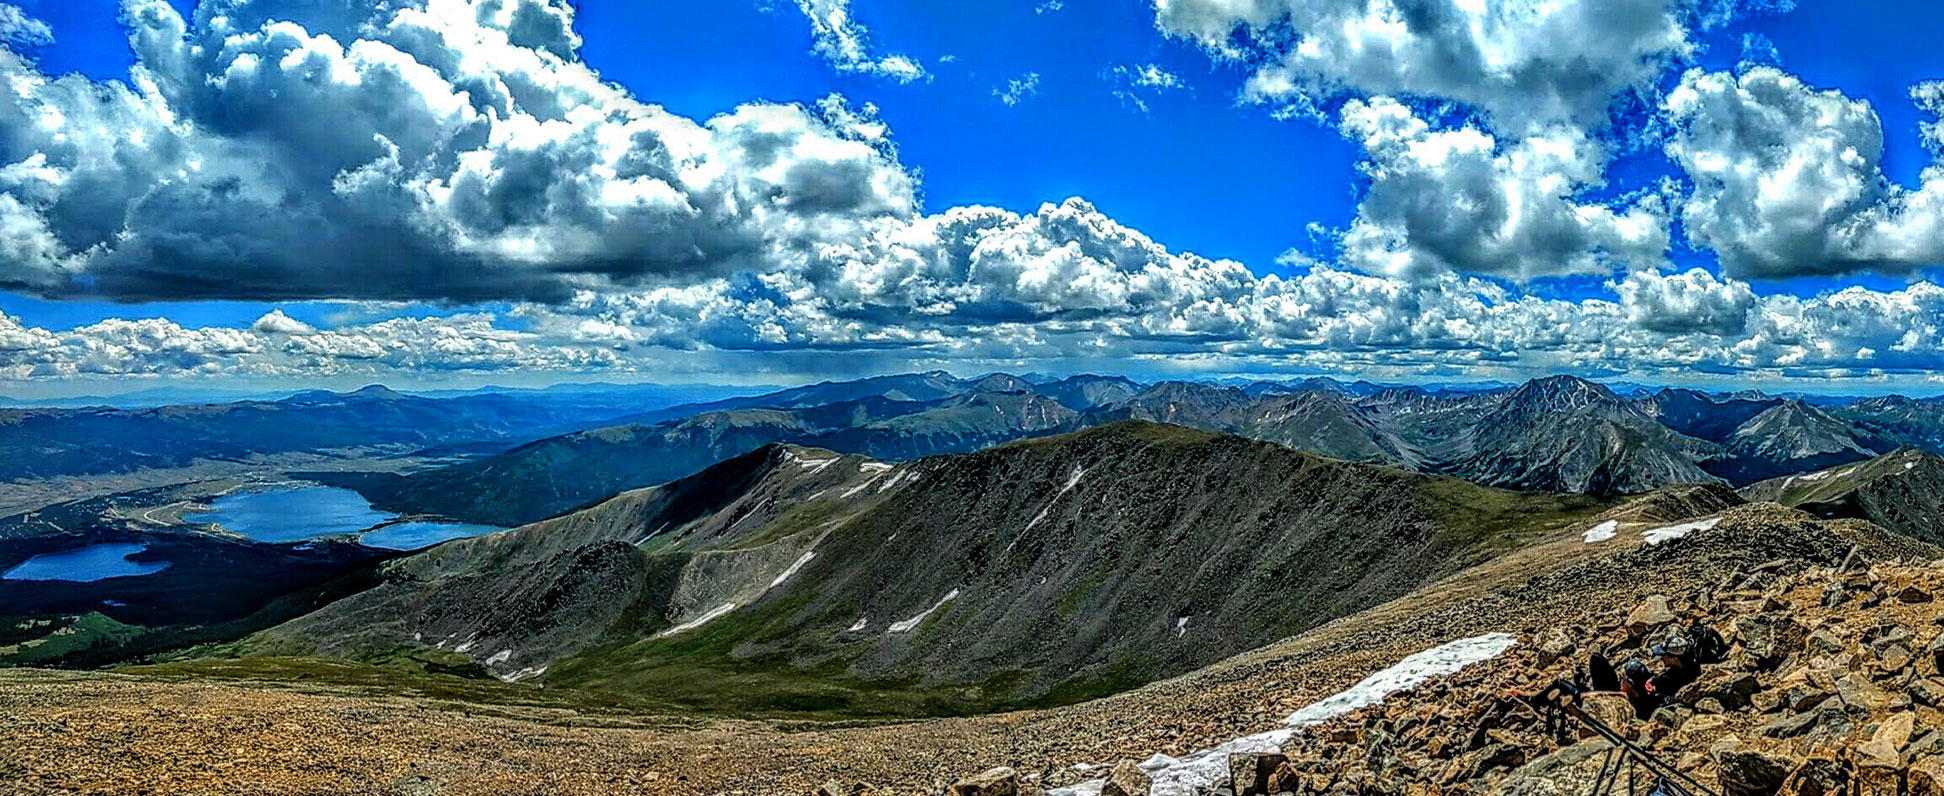 View of the Twin Lakes from Mount Elbert, Sawatch Range, Colorado, US